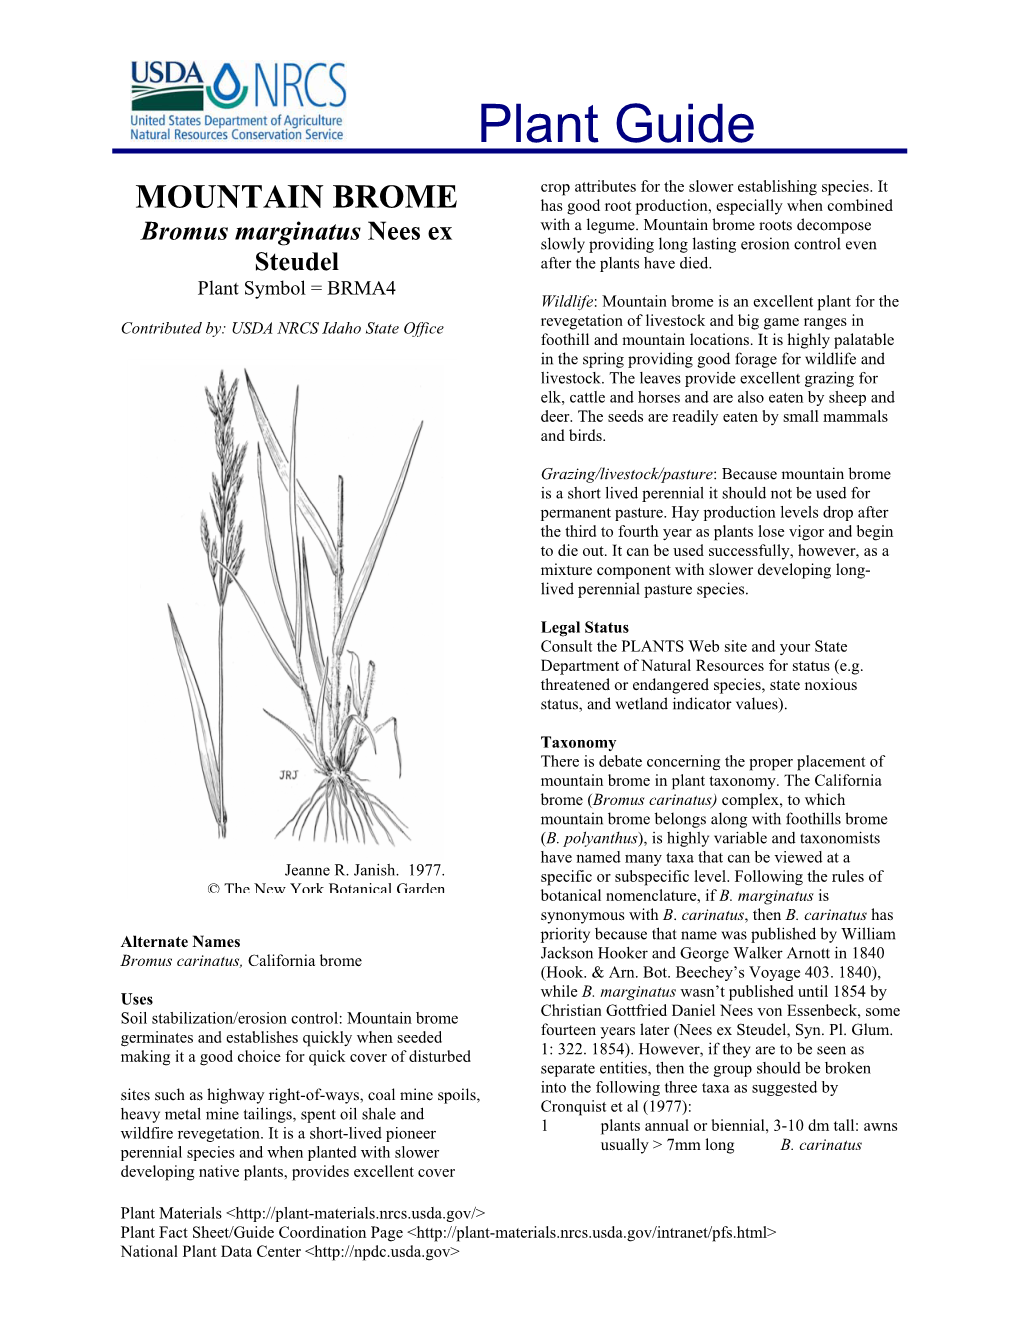 MOUNTAIN BROME Has Good Root Production, Especially When Combined with a Legume